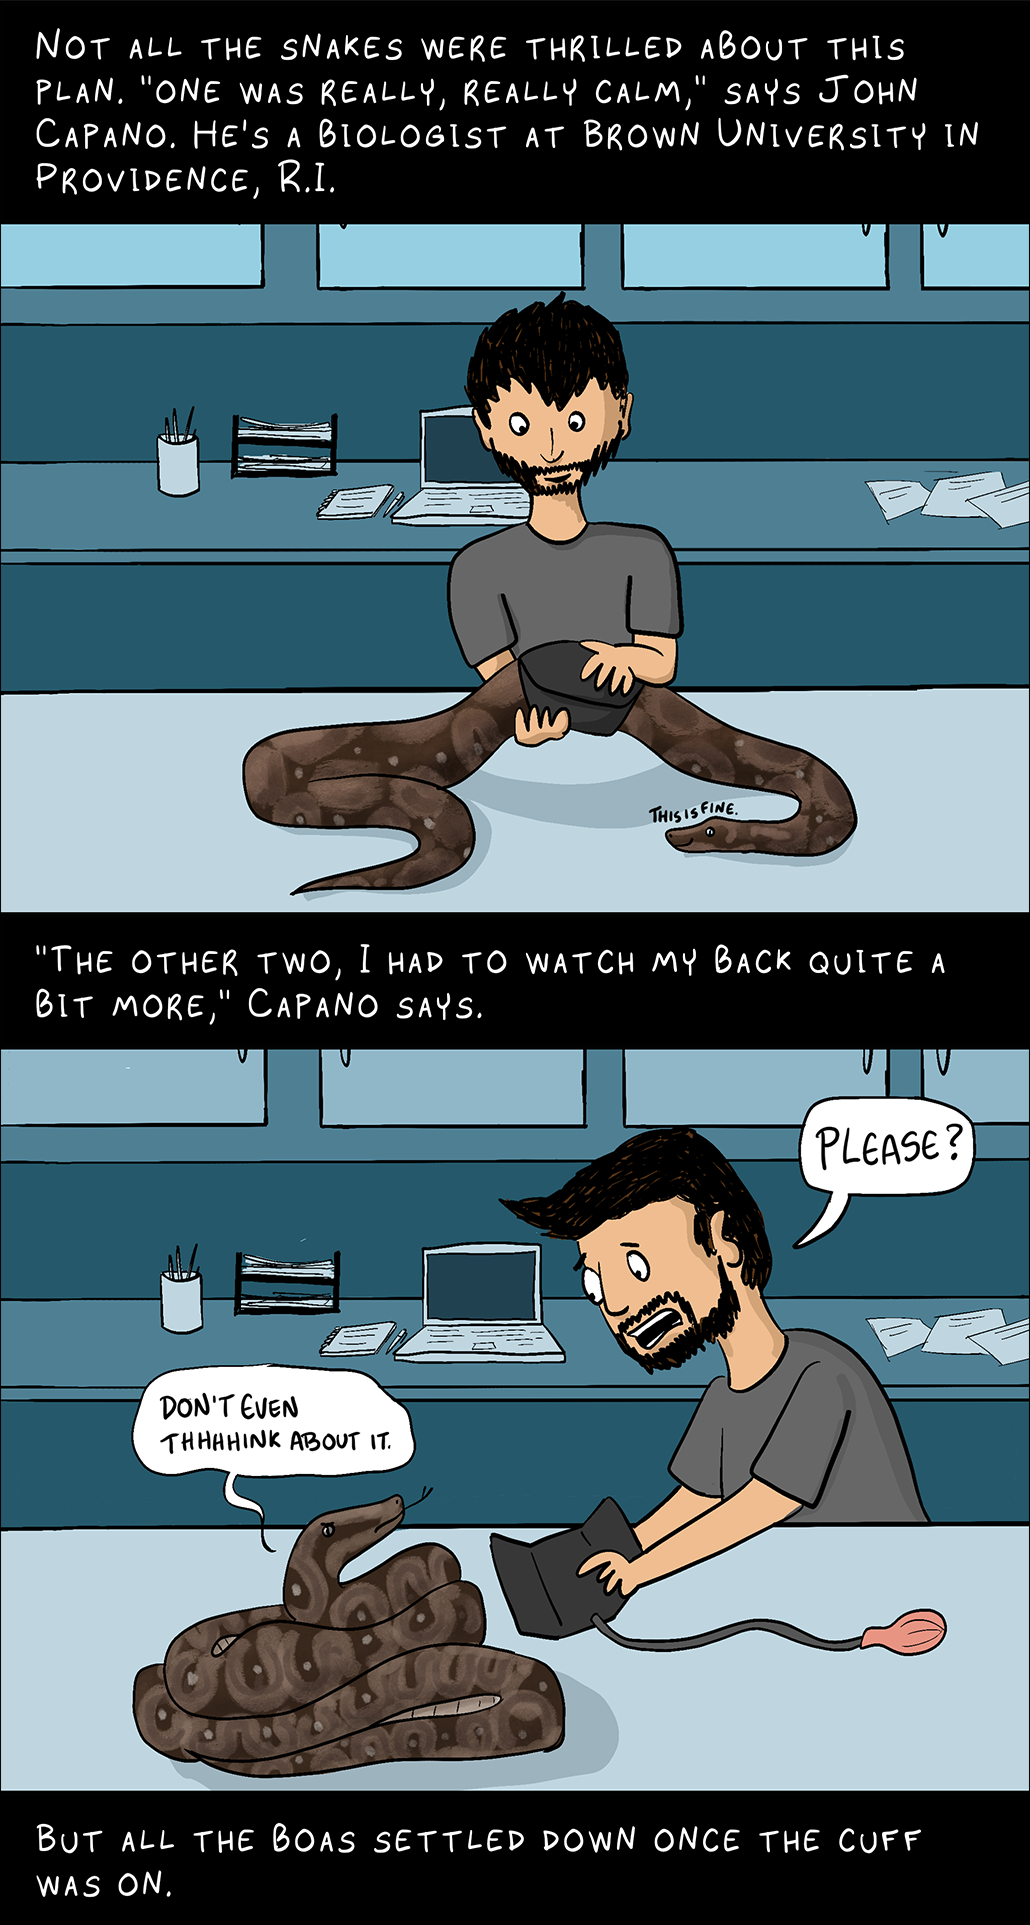 Panel 4. Top text: Not all the snakes were thrilled about this plan. 'One was really, really calm,' says John Capano. He's a biologist at Brown University in Providence, R.I.  Image of John, the man seen in panel 2, putting a cuff on a snake resting calmly on a desk. The snake says 'This is fine' Middle Text: 'The other two, I had to watch my back quite a bit more,' Capano says. Image below: Capano holds a blood pressure cuff towards a snake and says 'Please?" The snake is coiled up and glaring at Capano 'Don't even thhhhhhink about it' Bottom text: But all the boas settled down once the cuff was on.'